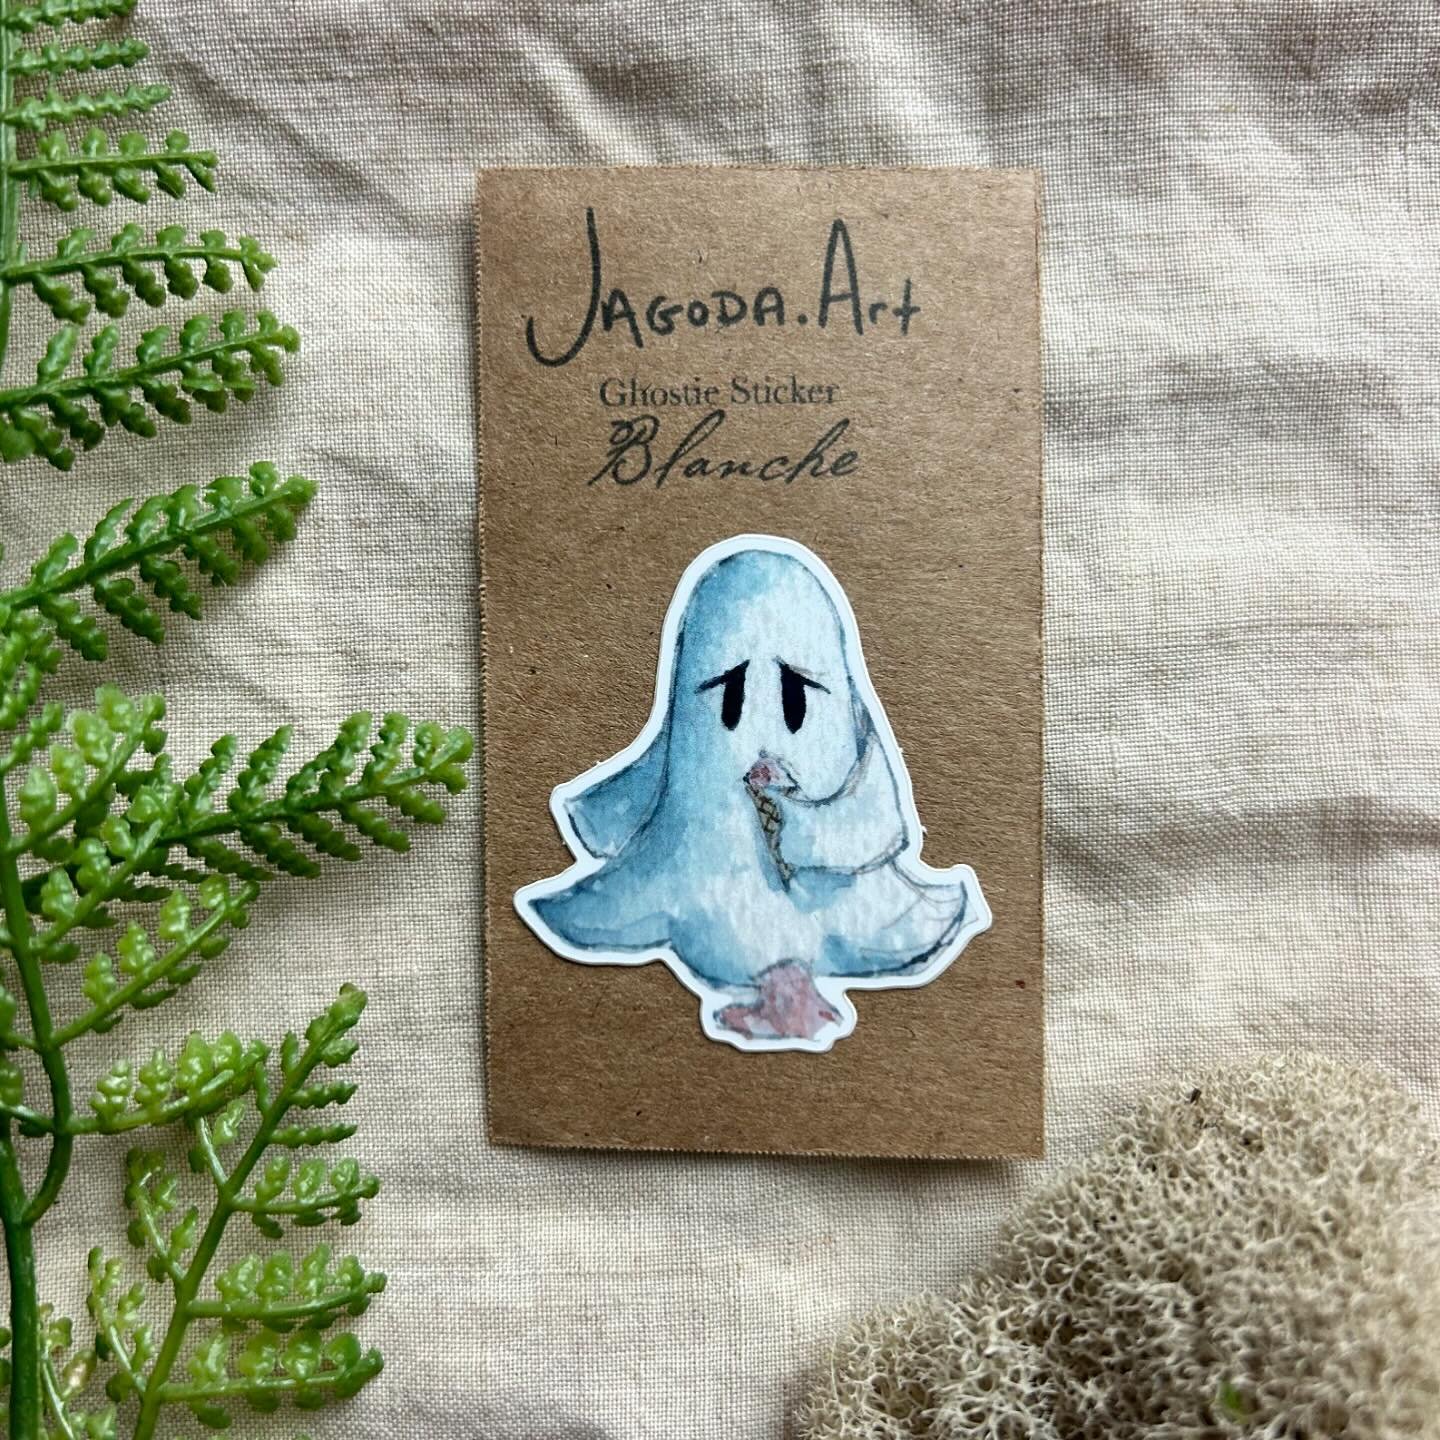 Ghostie Blanche is feeling the heat today! As part of my beloved Ghostie sticker series, Blanche, like all her spooky pals, is designed to brave the elements&mdash;rain or shine! Swipe to meet more of these charming specters.

Did you know? All my st